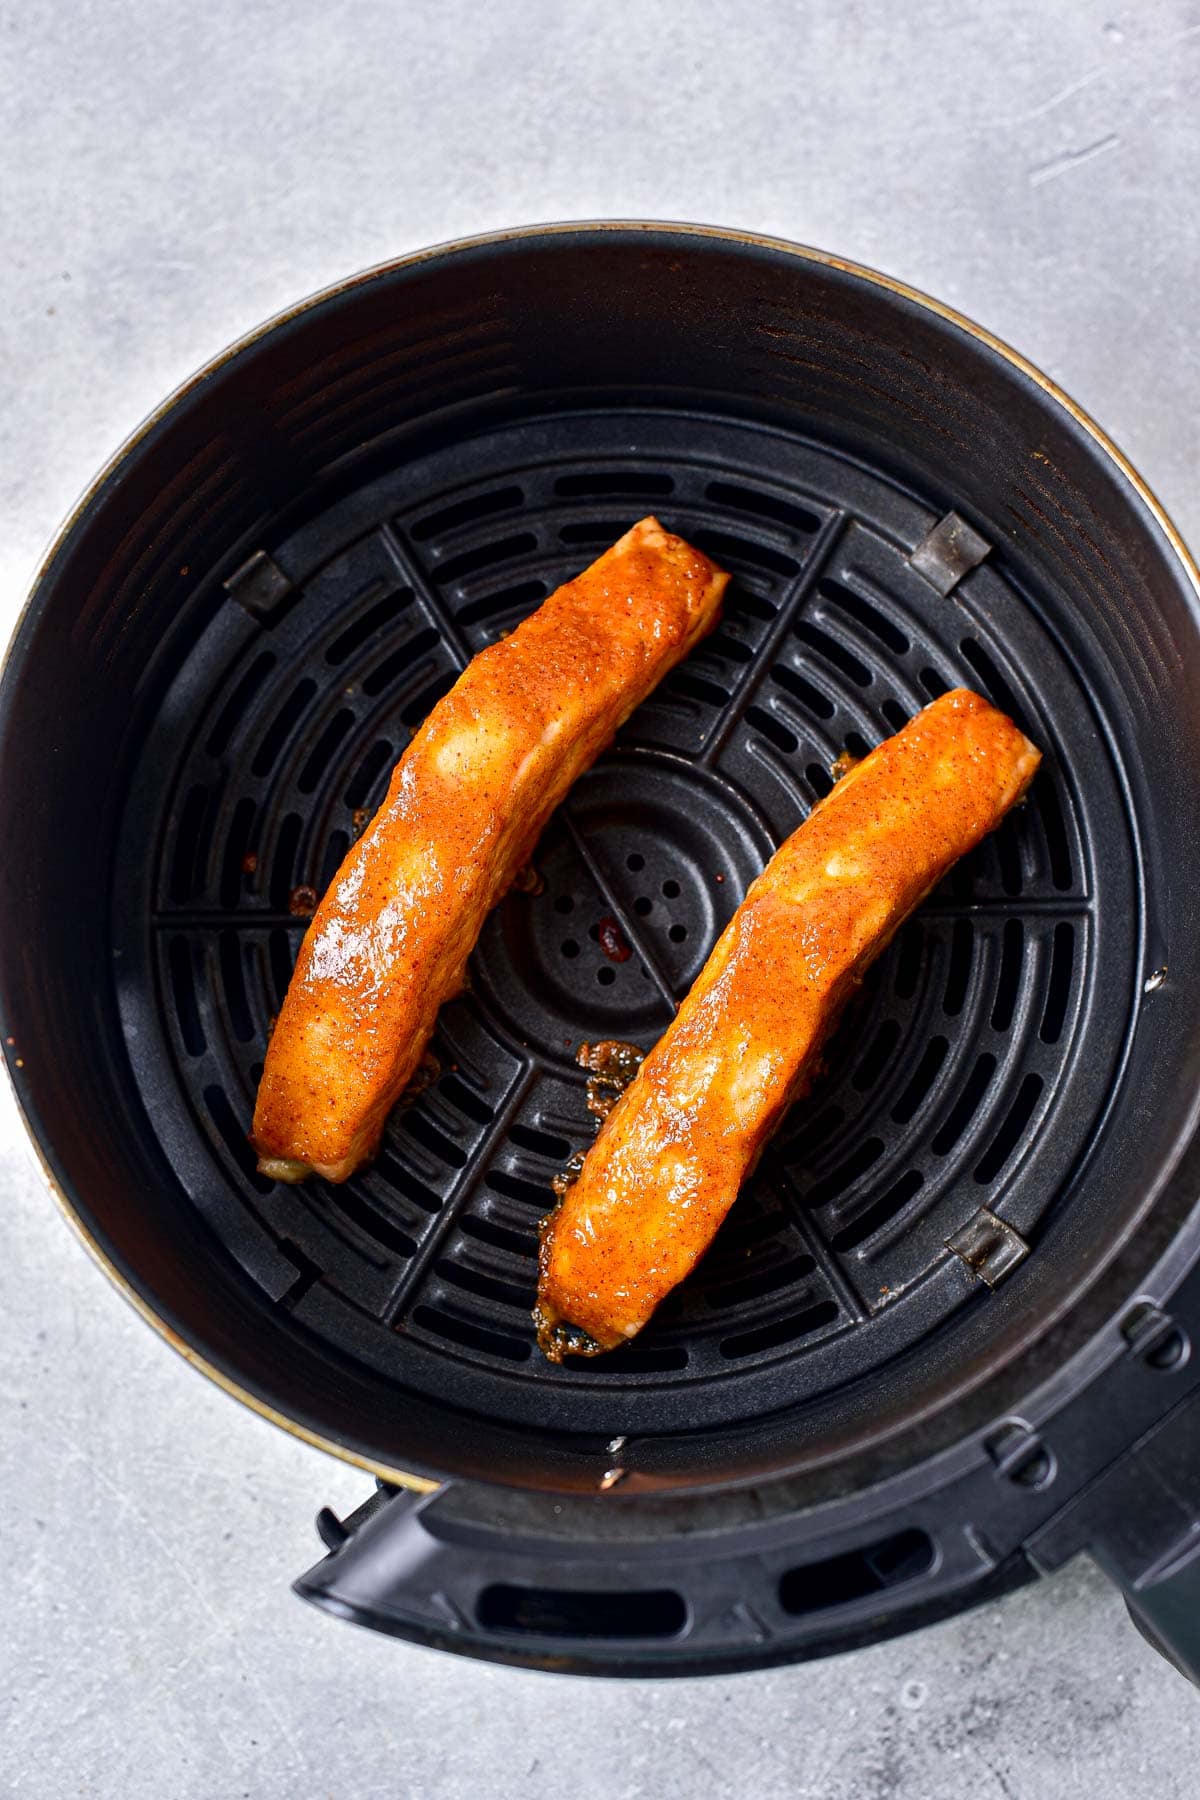 cooked pieces of honey mustard salmon in round black air fryer basket.